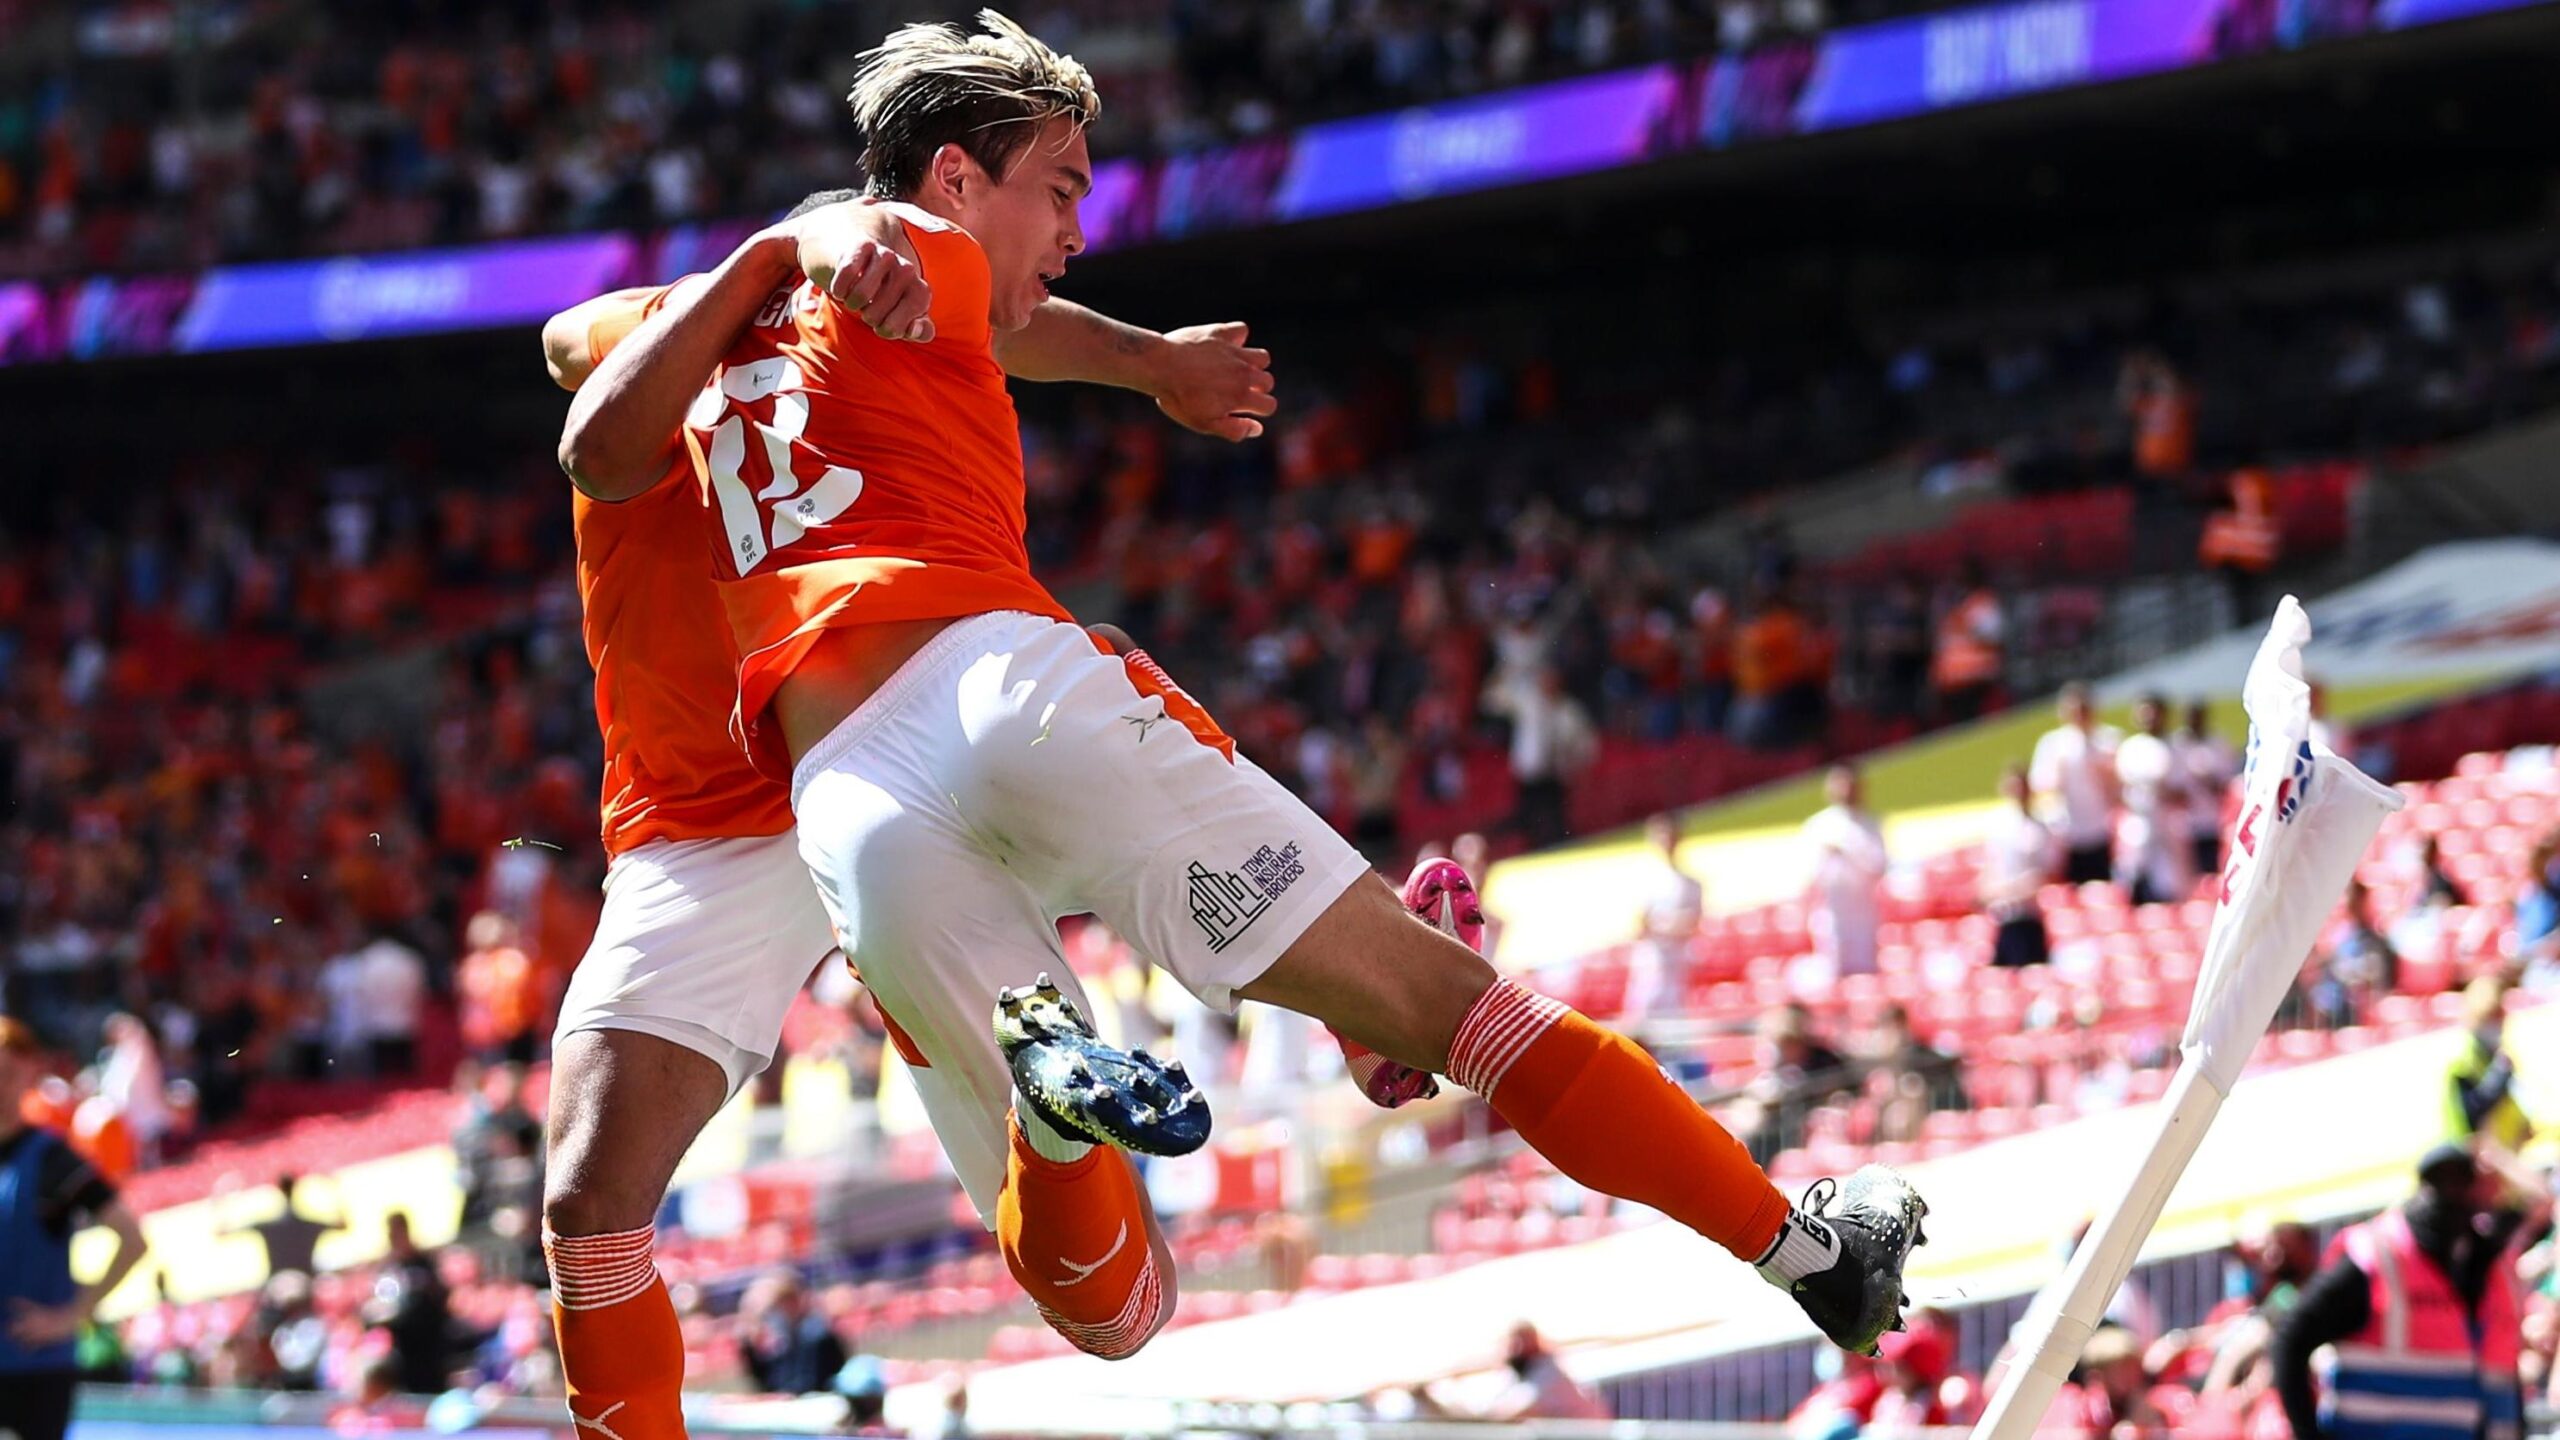 Dougall's double sent Blackpool to the top (Source: The Times)